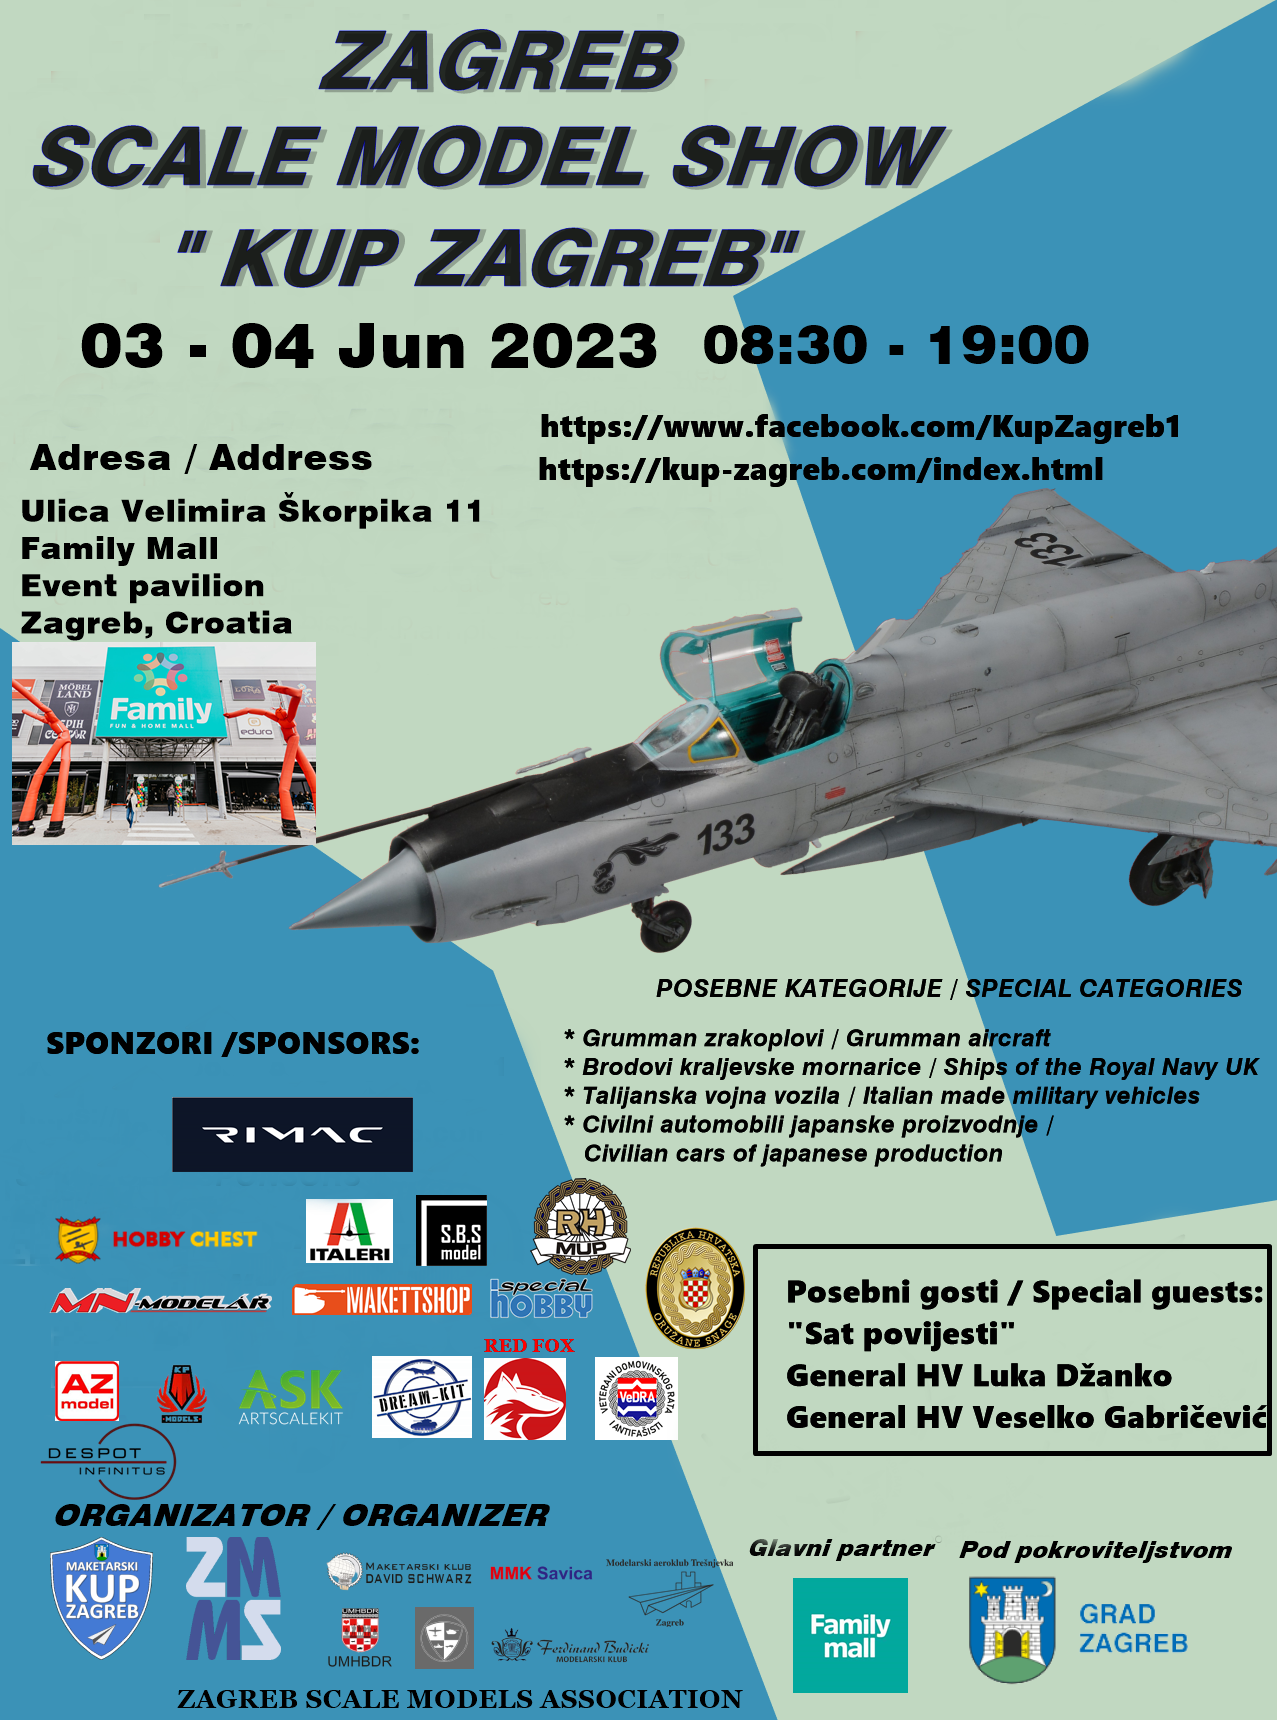 Pre-orders for the Zagreb Scale Model Show 